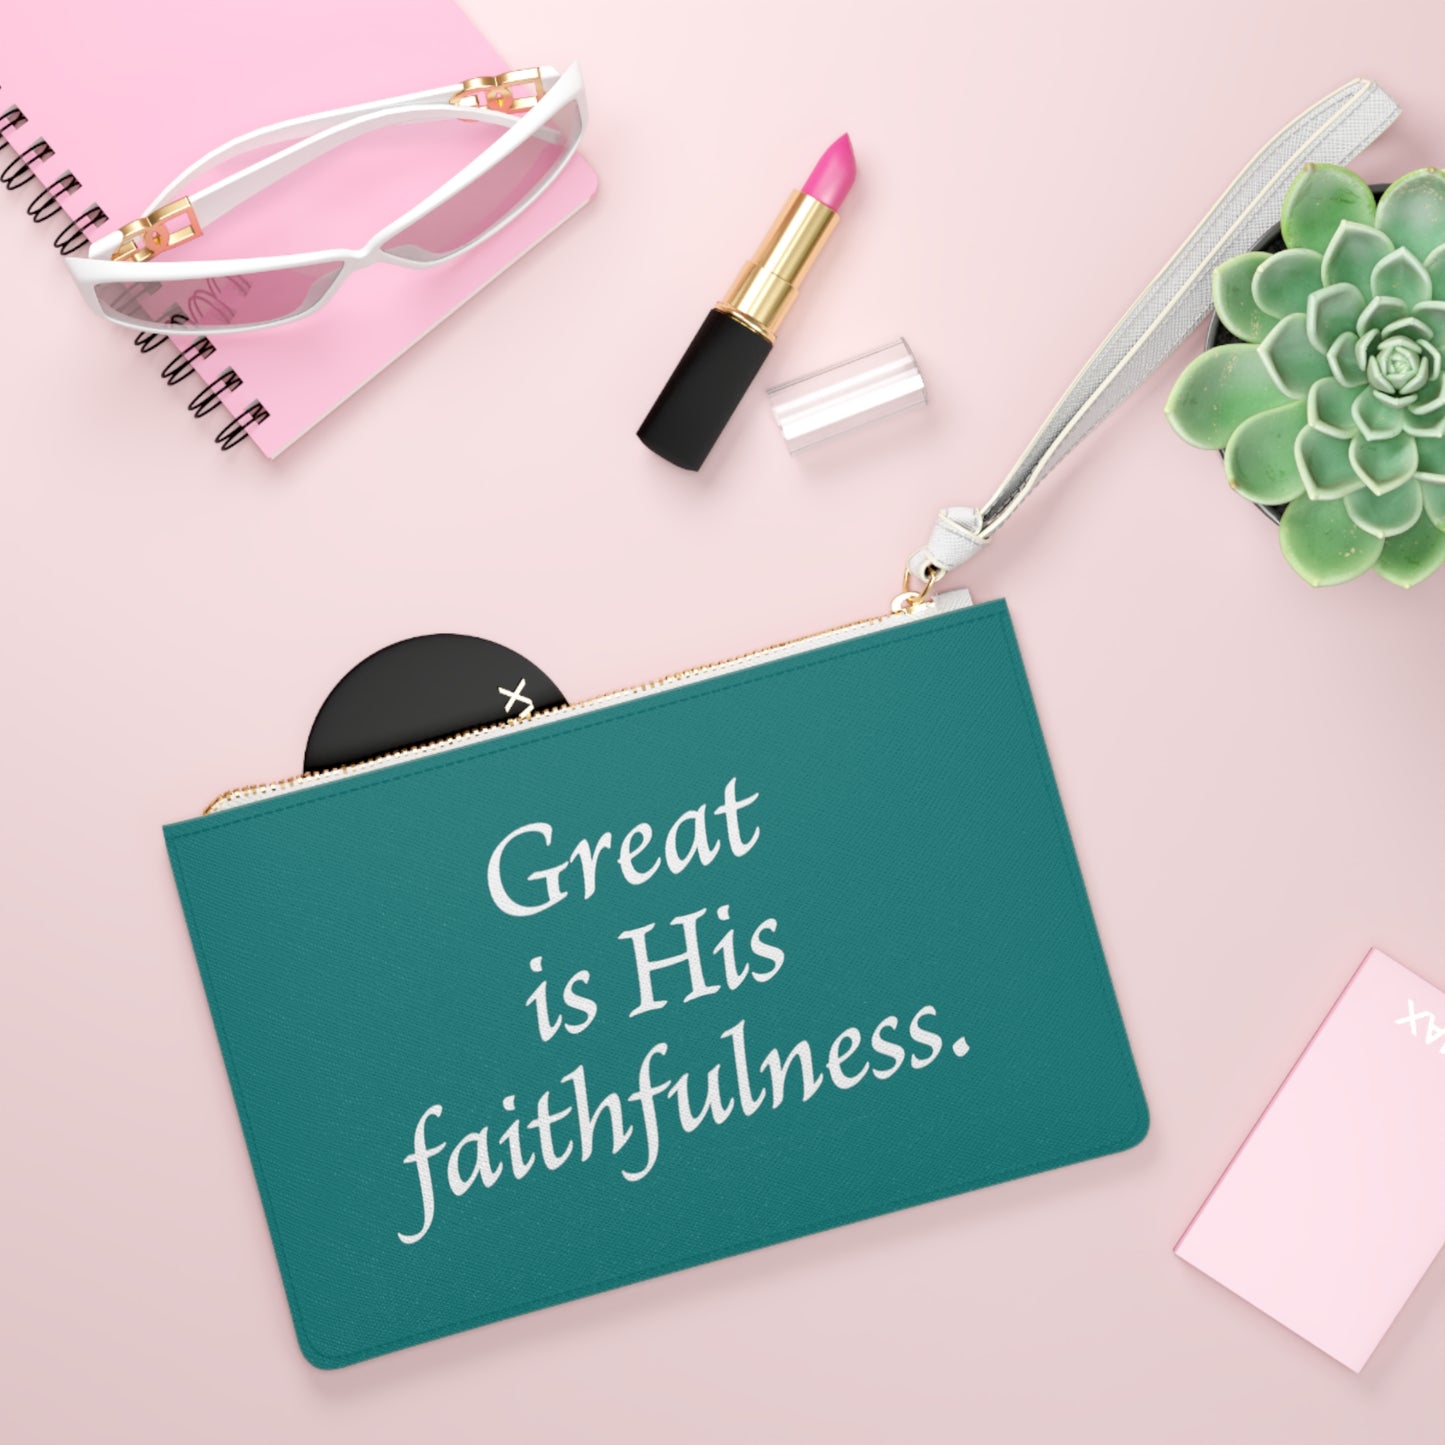 Clutch Bag - Great Is His Faithfulness